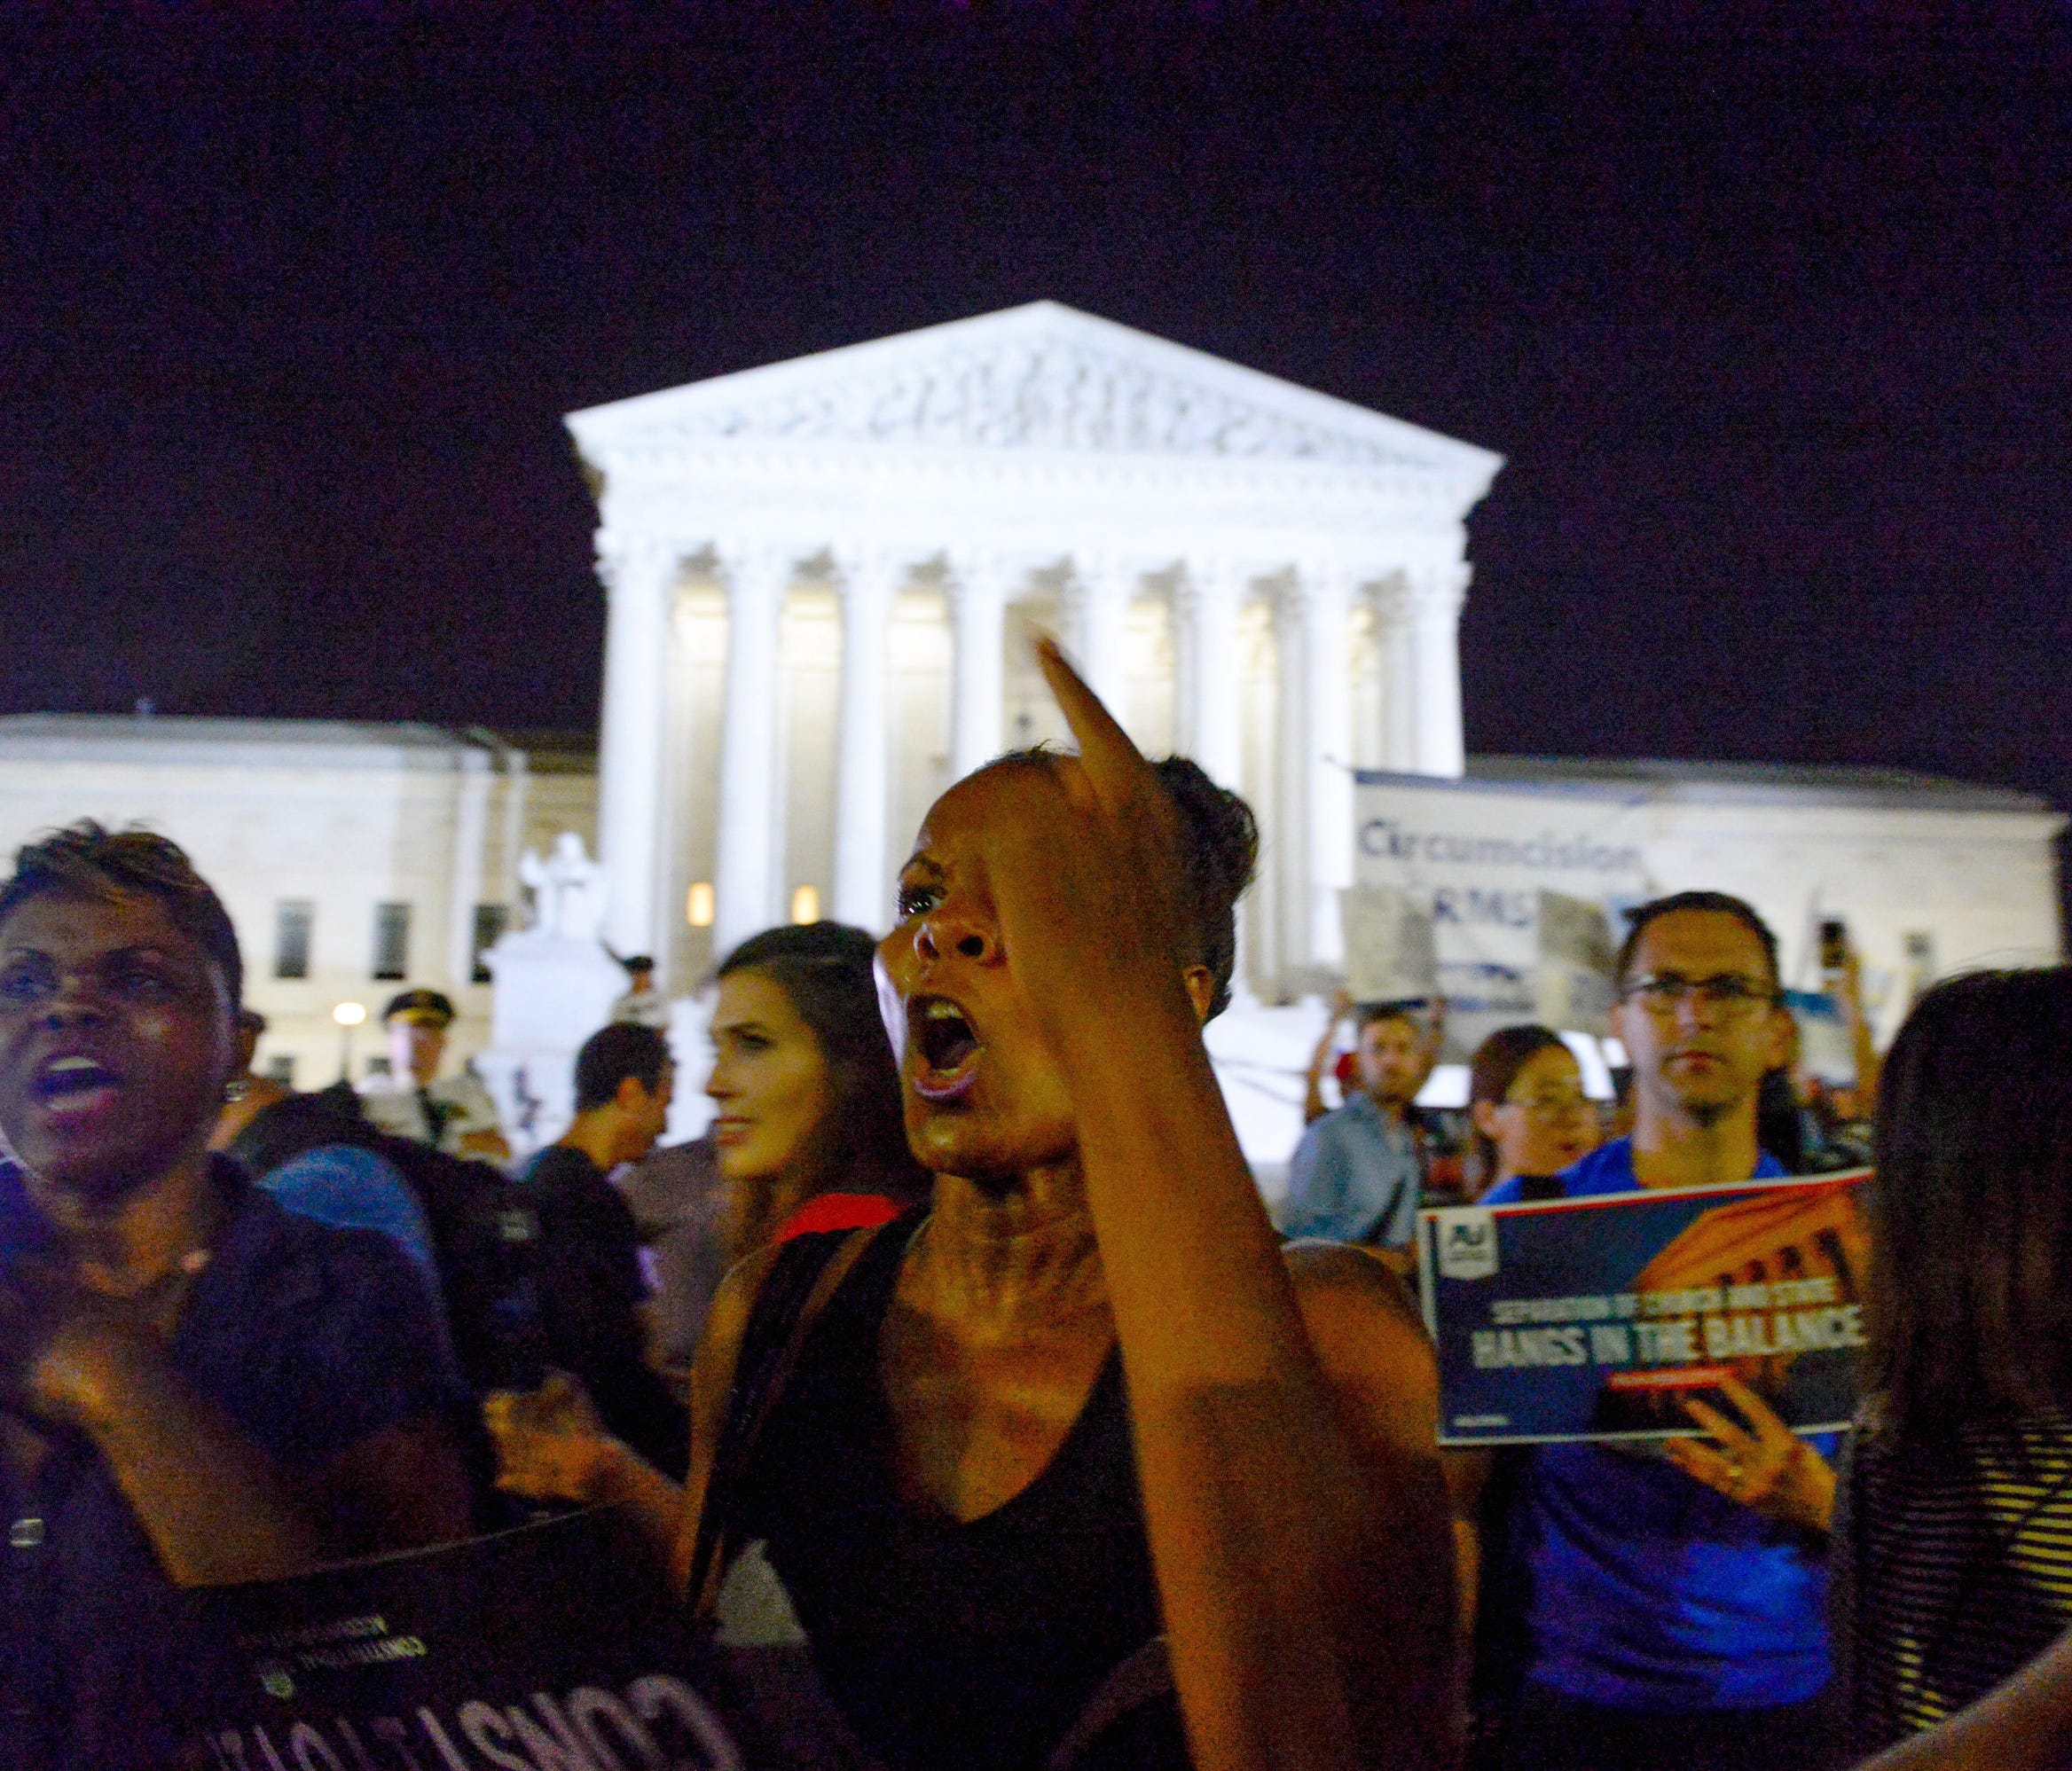 Pro-life and pro-choice groups clash outside of the Supreme Court to protest or support Donald Trump's Supreme Court Justice Nominee, Judge Brett Kavanaugh, to replace Justice Kennedy, July 9, 2018.